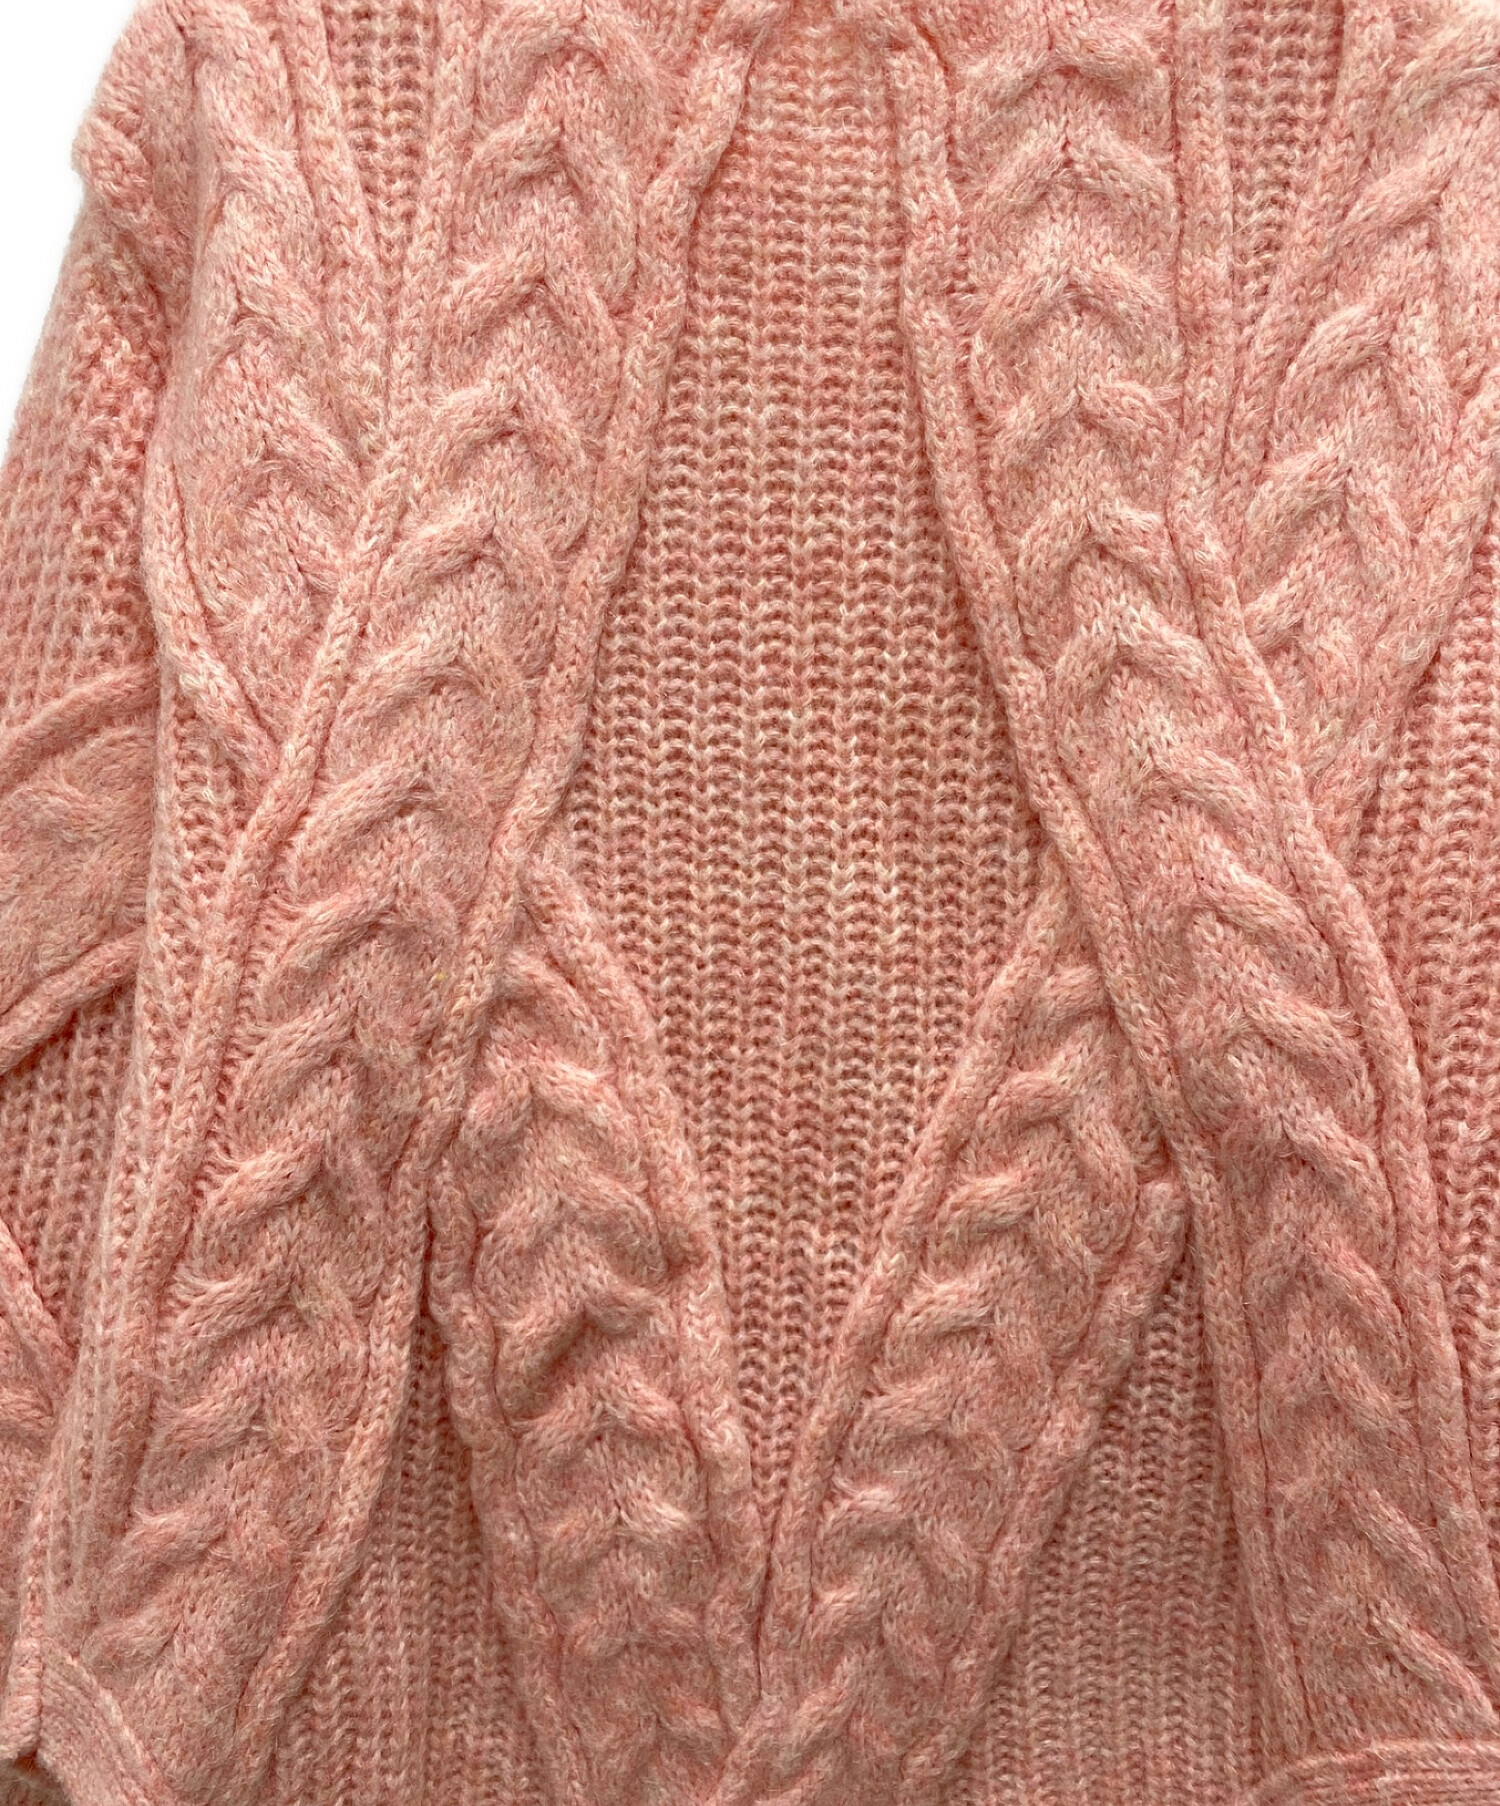 AMERI BACK CABLE KNIT サーモンピンクニット